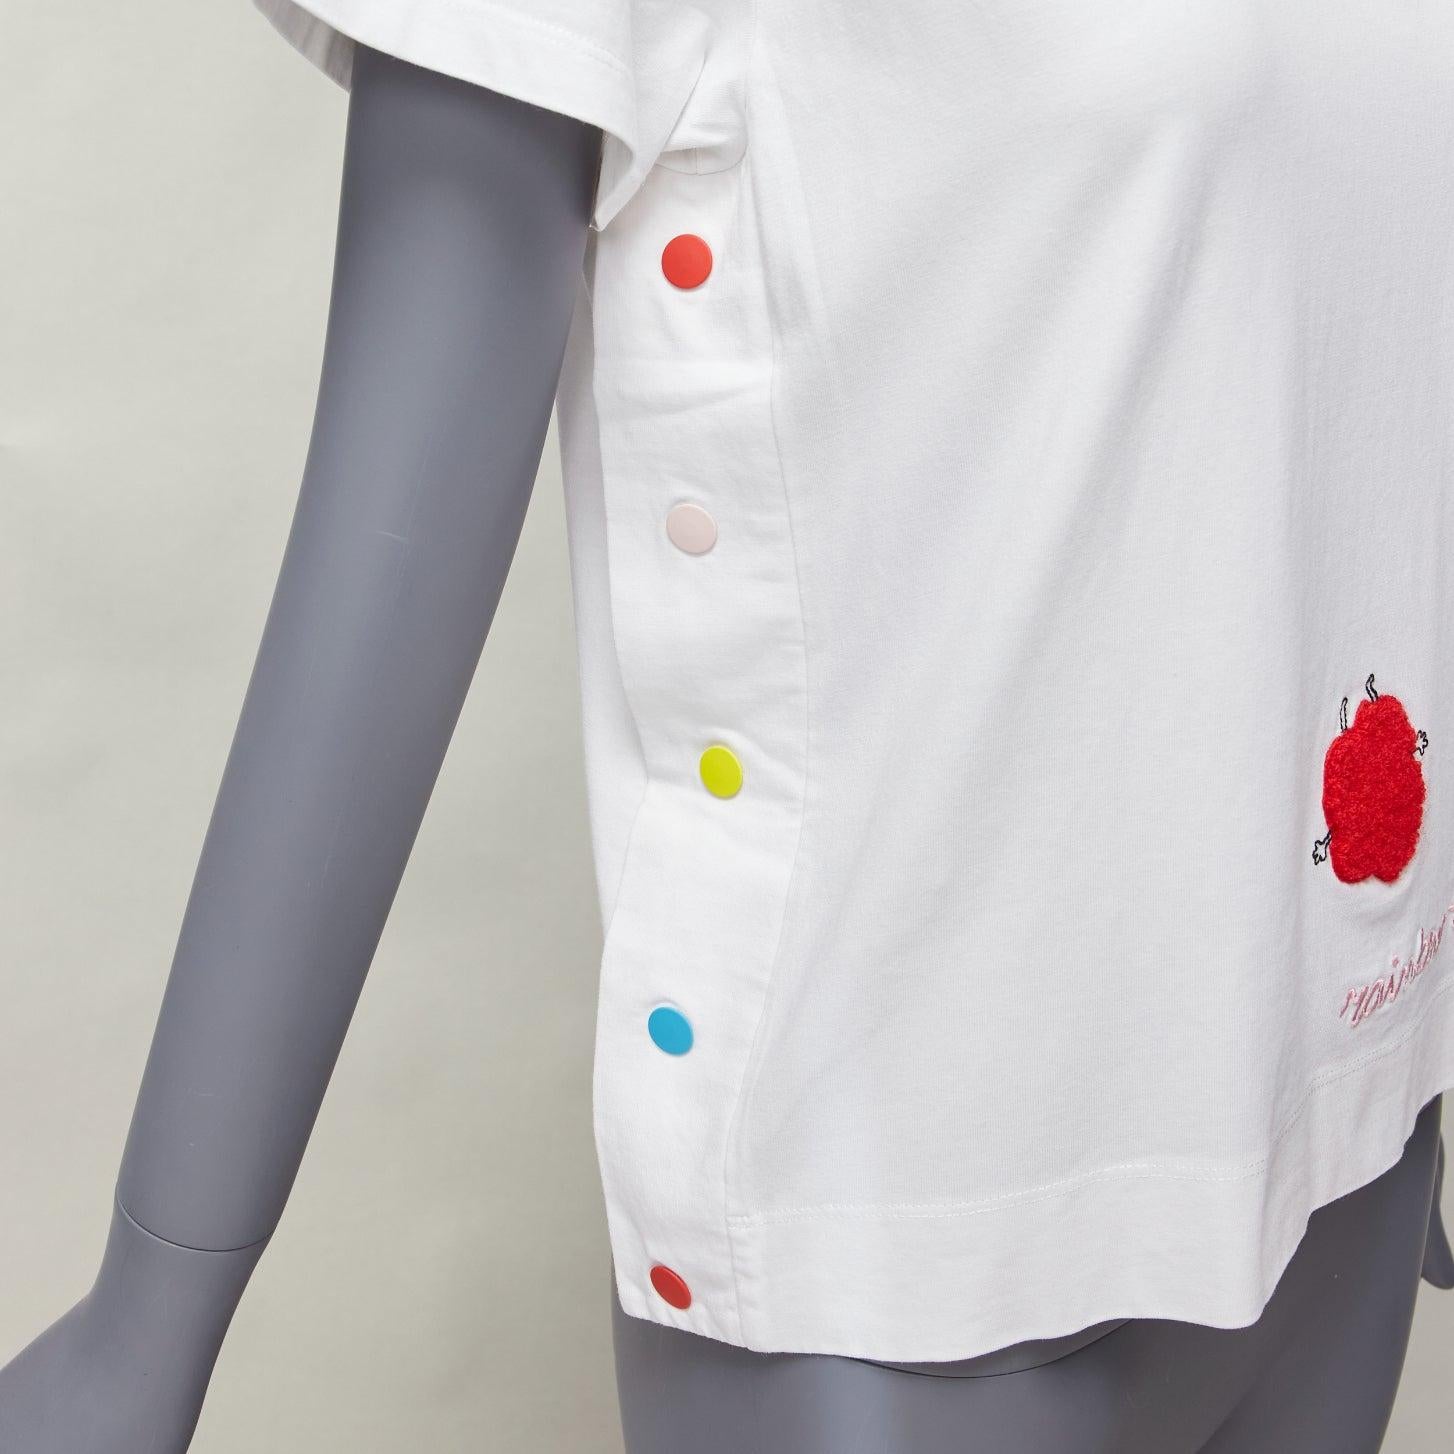 MIRA MIKATI Rainbow TRibe tufted sheep button side short sleeve tshirt FR34 XS
Reference: KYCG/A00058
Brand: Mira Mikati
Material: Cotton
Color: White, Multicolour
Pattern: Solid
Extra Details: Tufted fabric sheep. Colourful snap side buttons.
Made